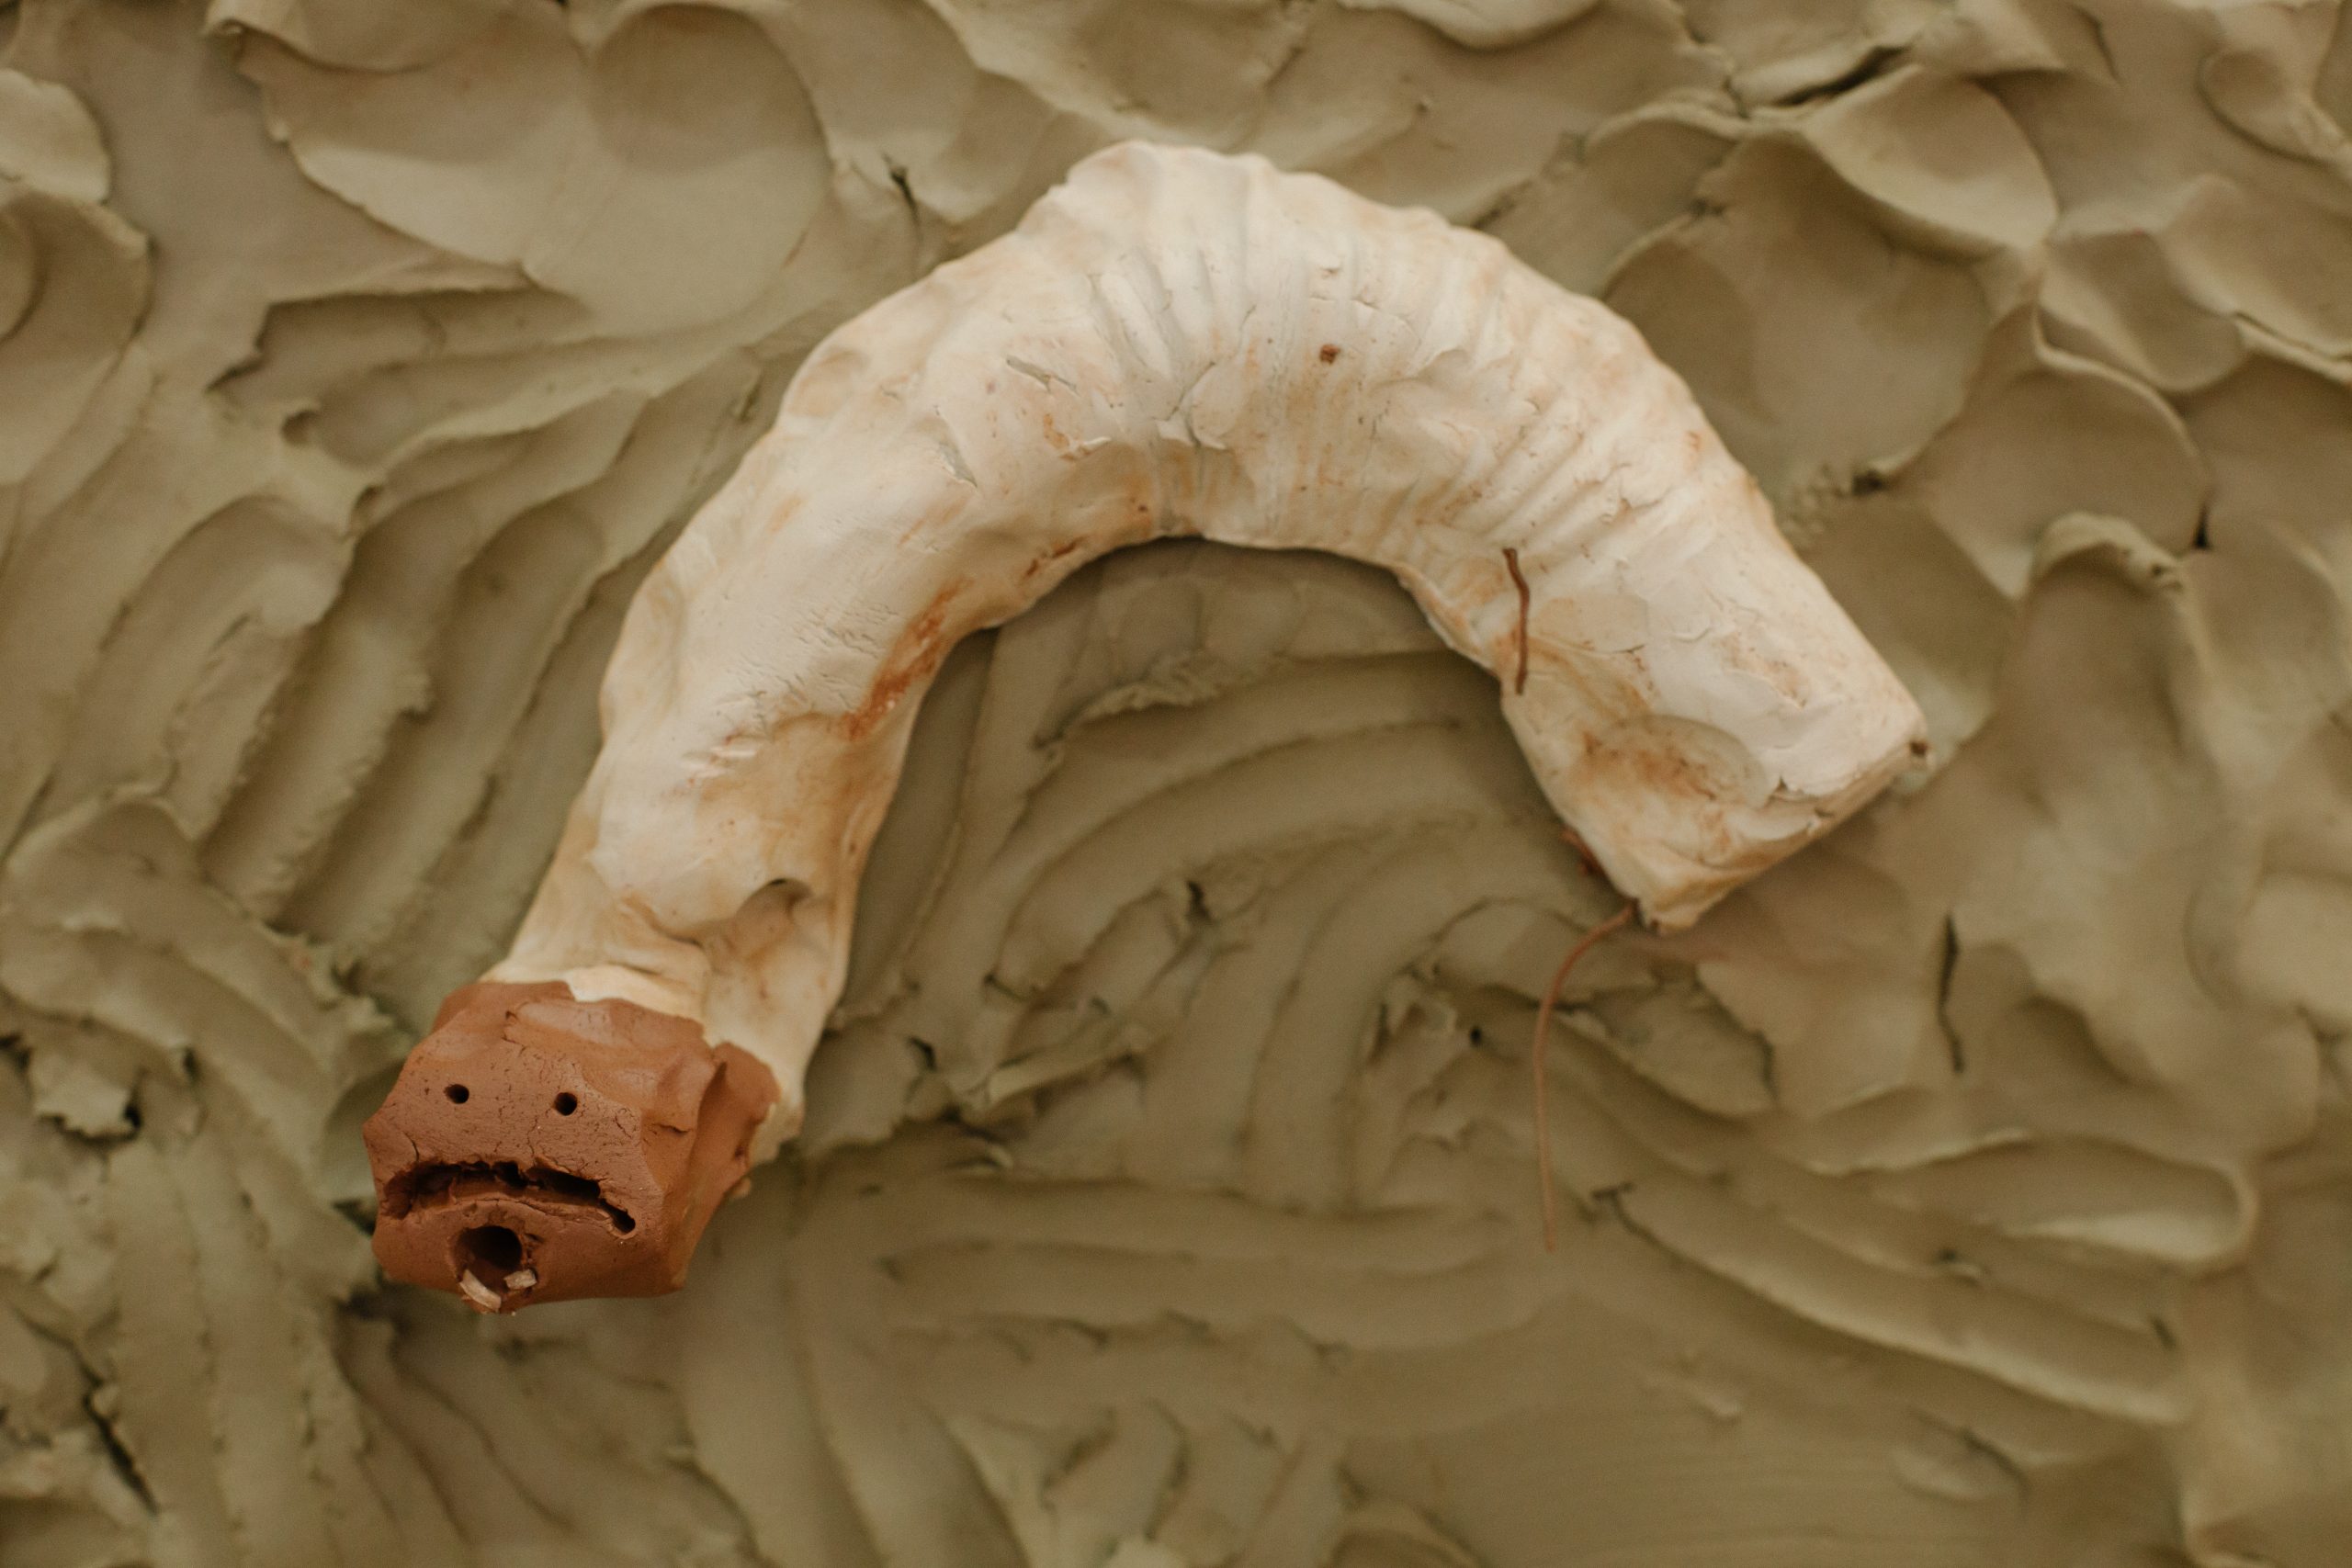 A white clay worm-like creation against a brown clay background